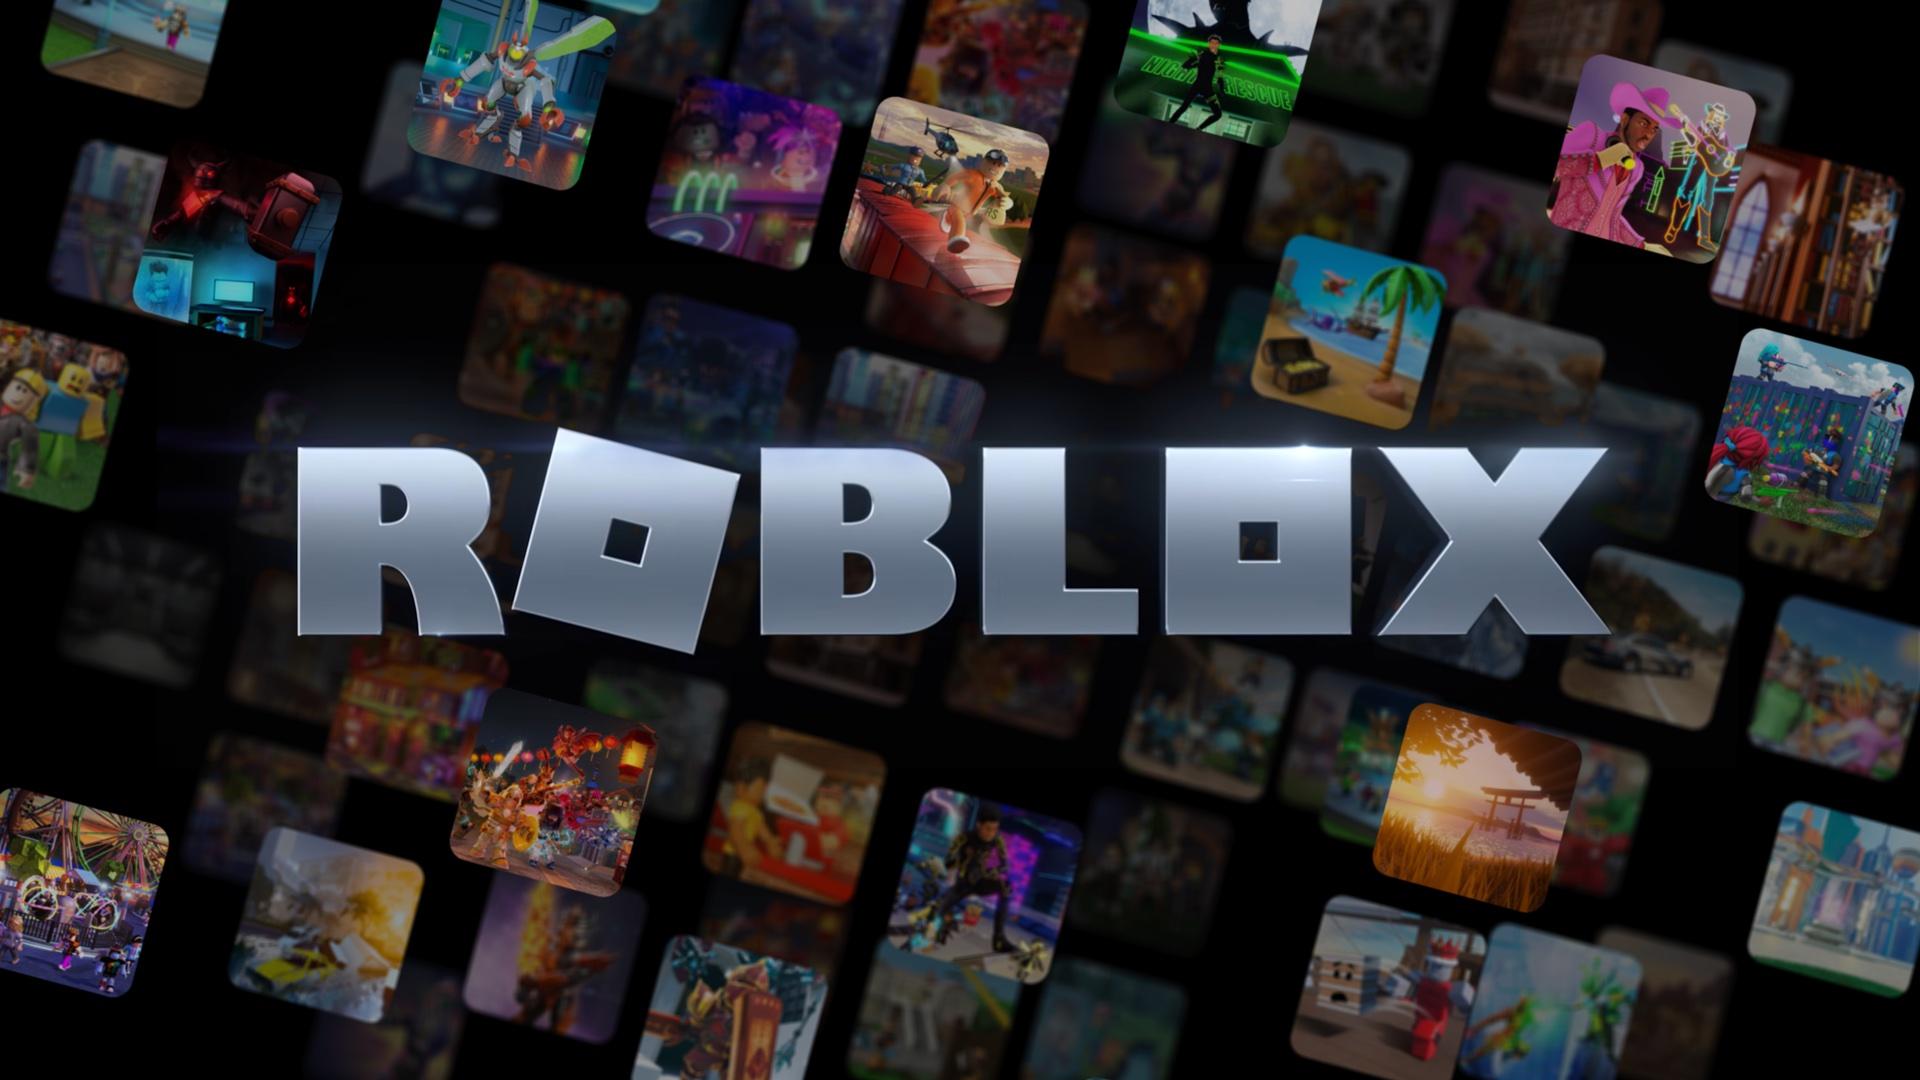 Does the 'Pls Donate' Game in 'Roblox' Give Robux? Explained